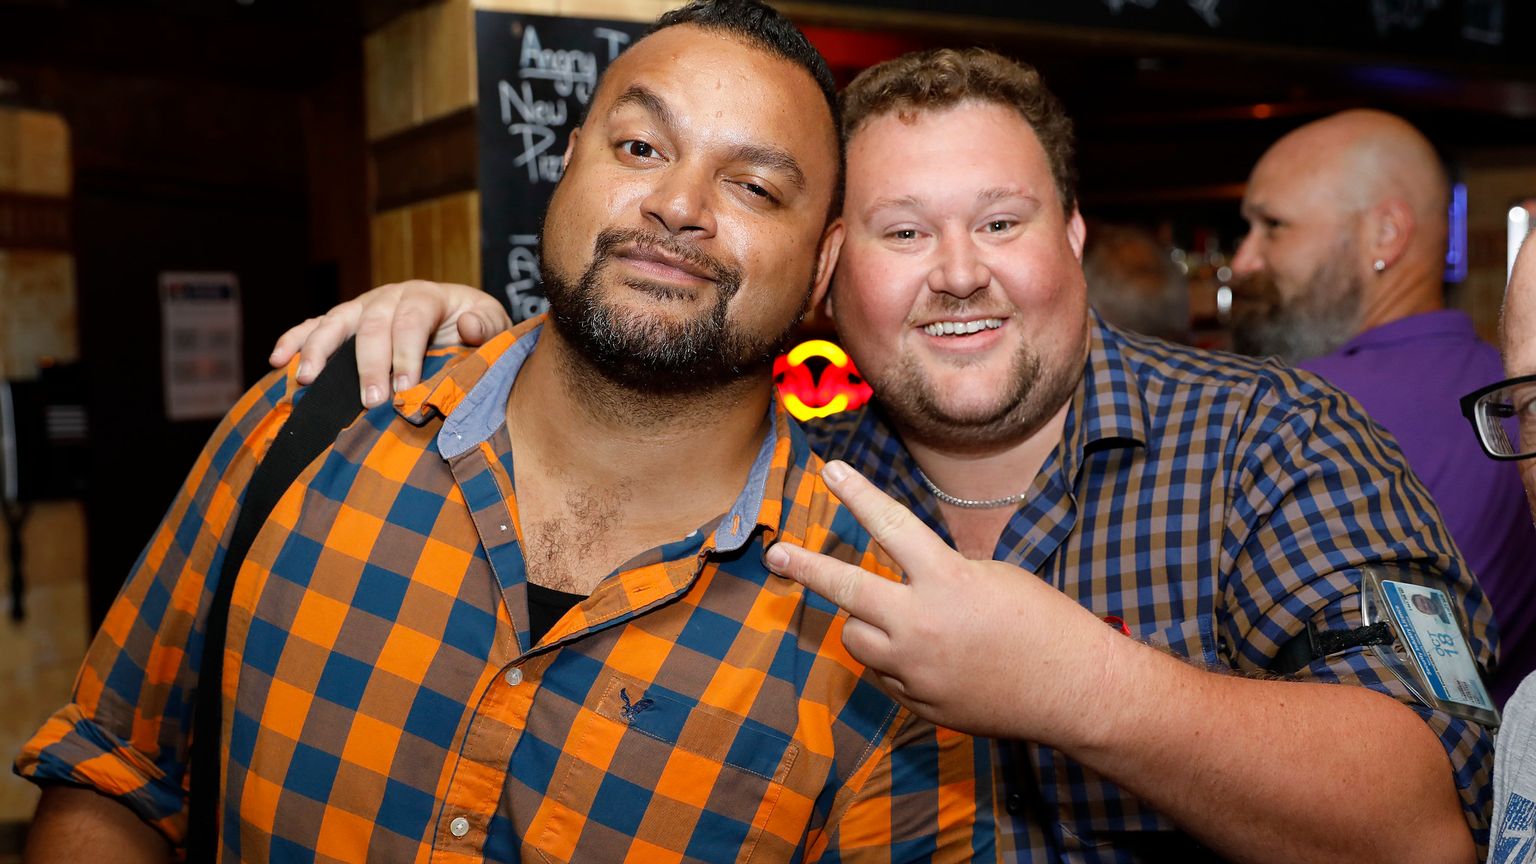 New gay bar for bears opens in Sydney